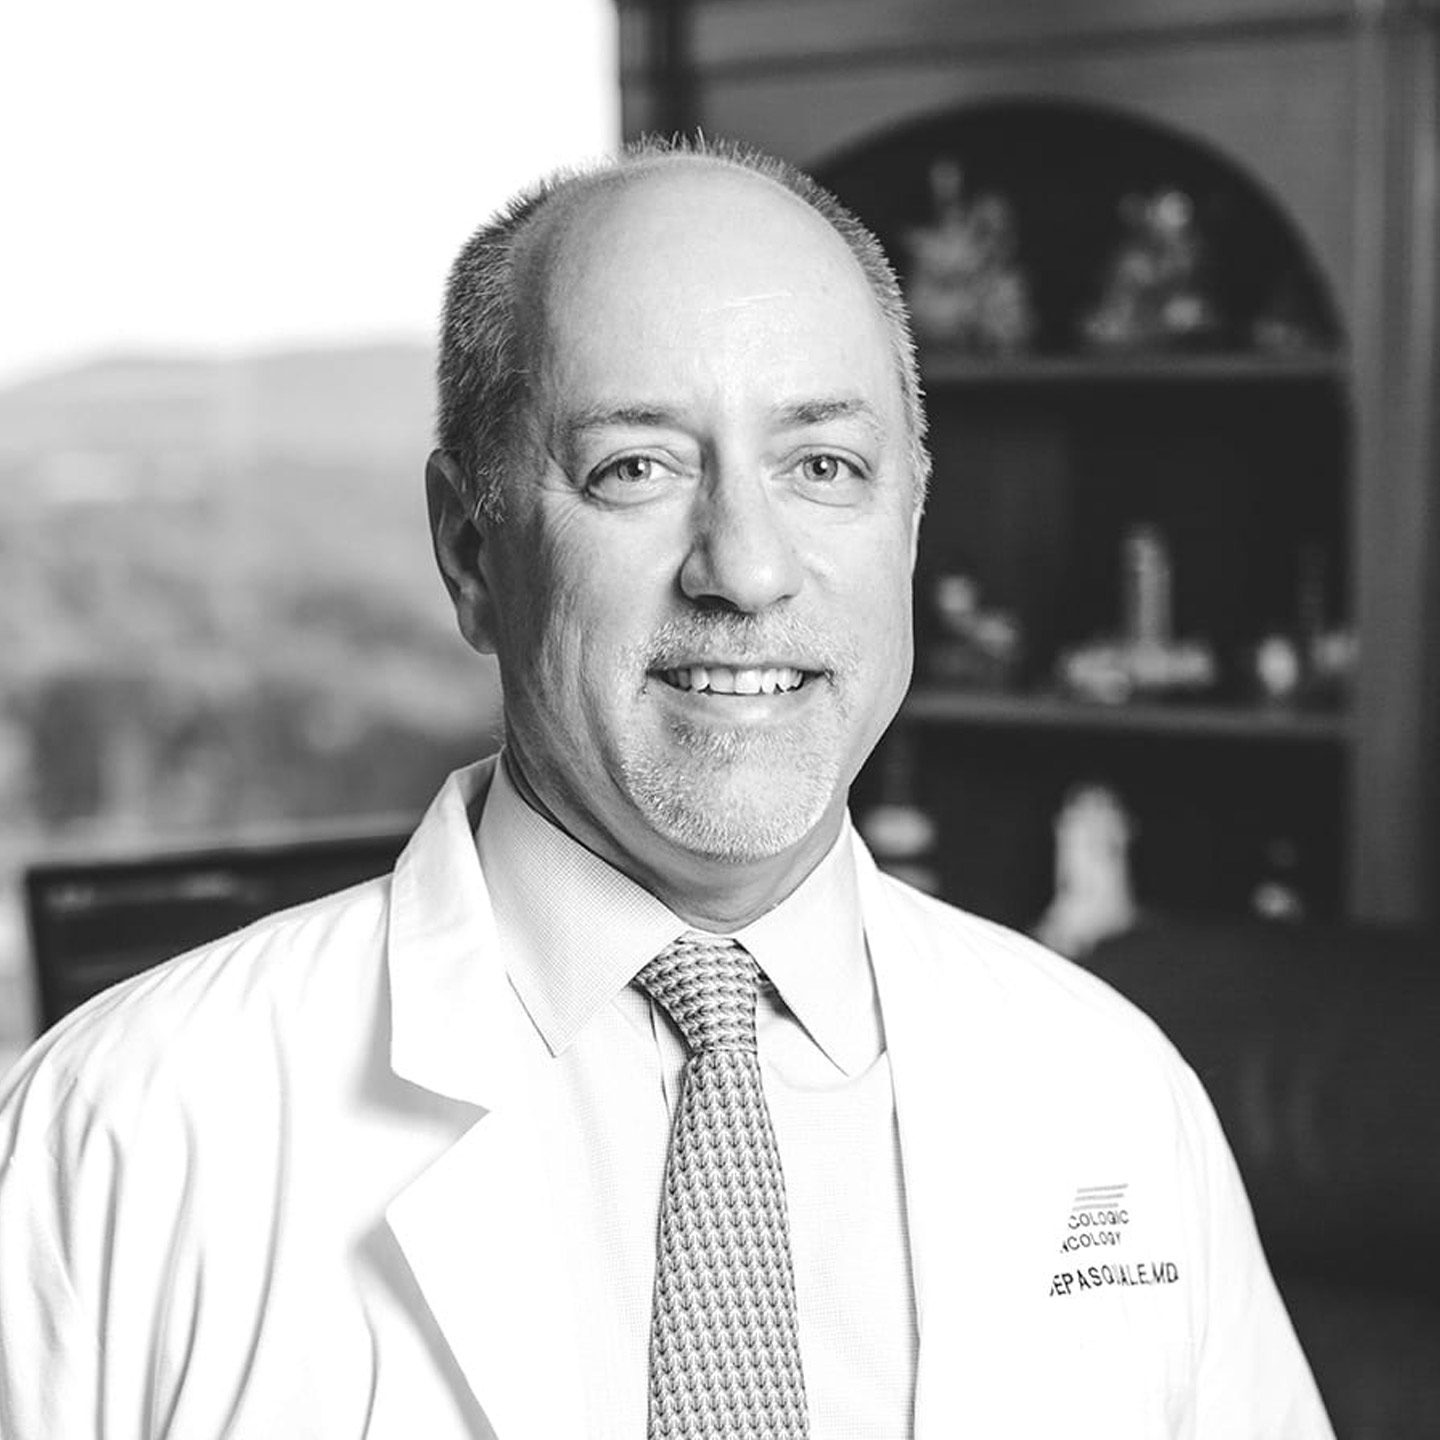 DR. STEPHEN DEPASQUALE AT ERLANGER WOMEN’S ONCOLOGY in chattanooga